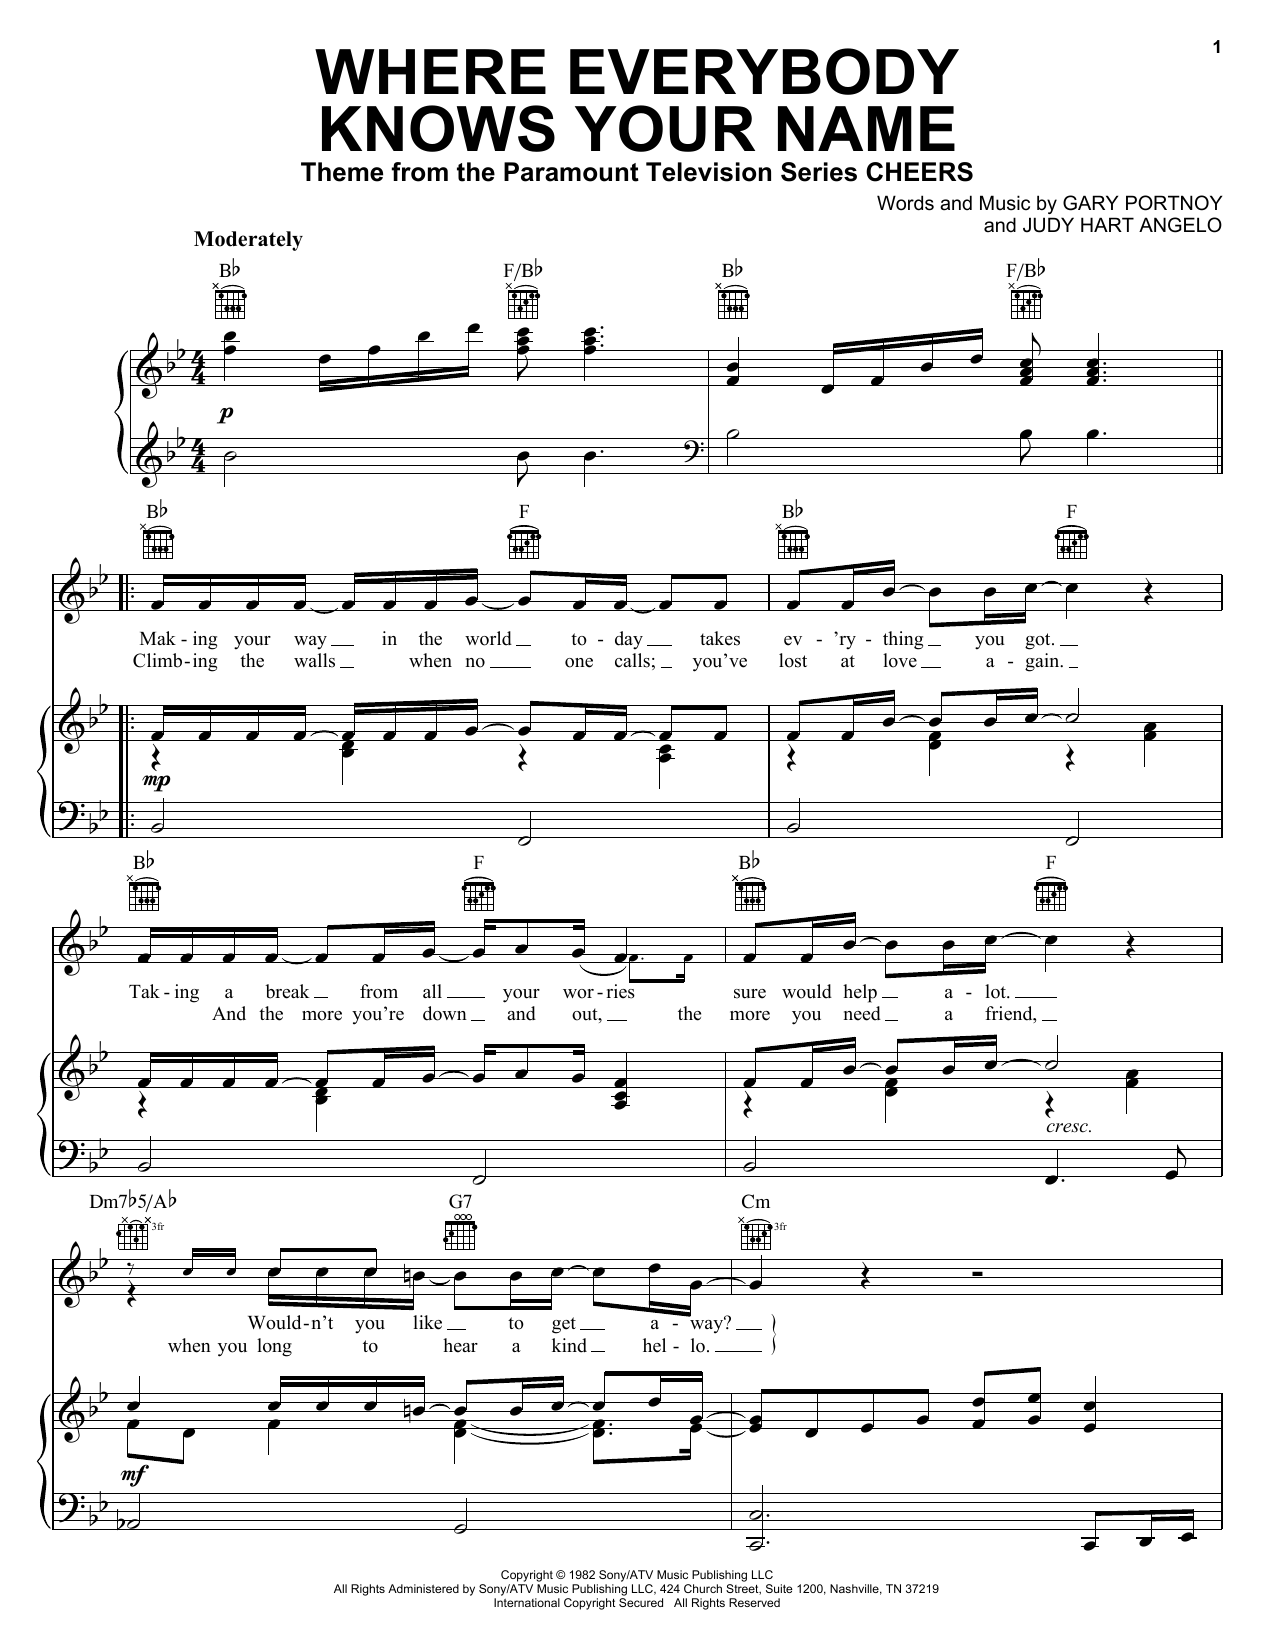 Gary Portnoy Where Everybody Knows Your Name sheet music notes and chords. Download Printable PDF.